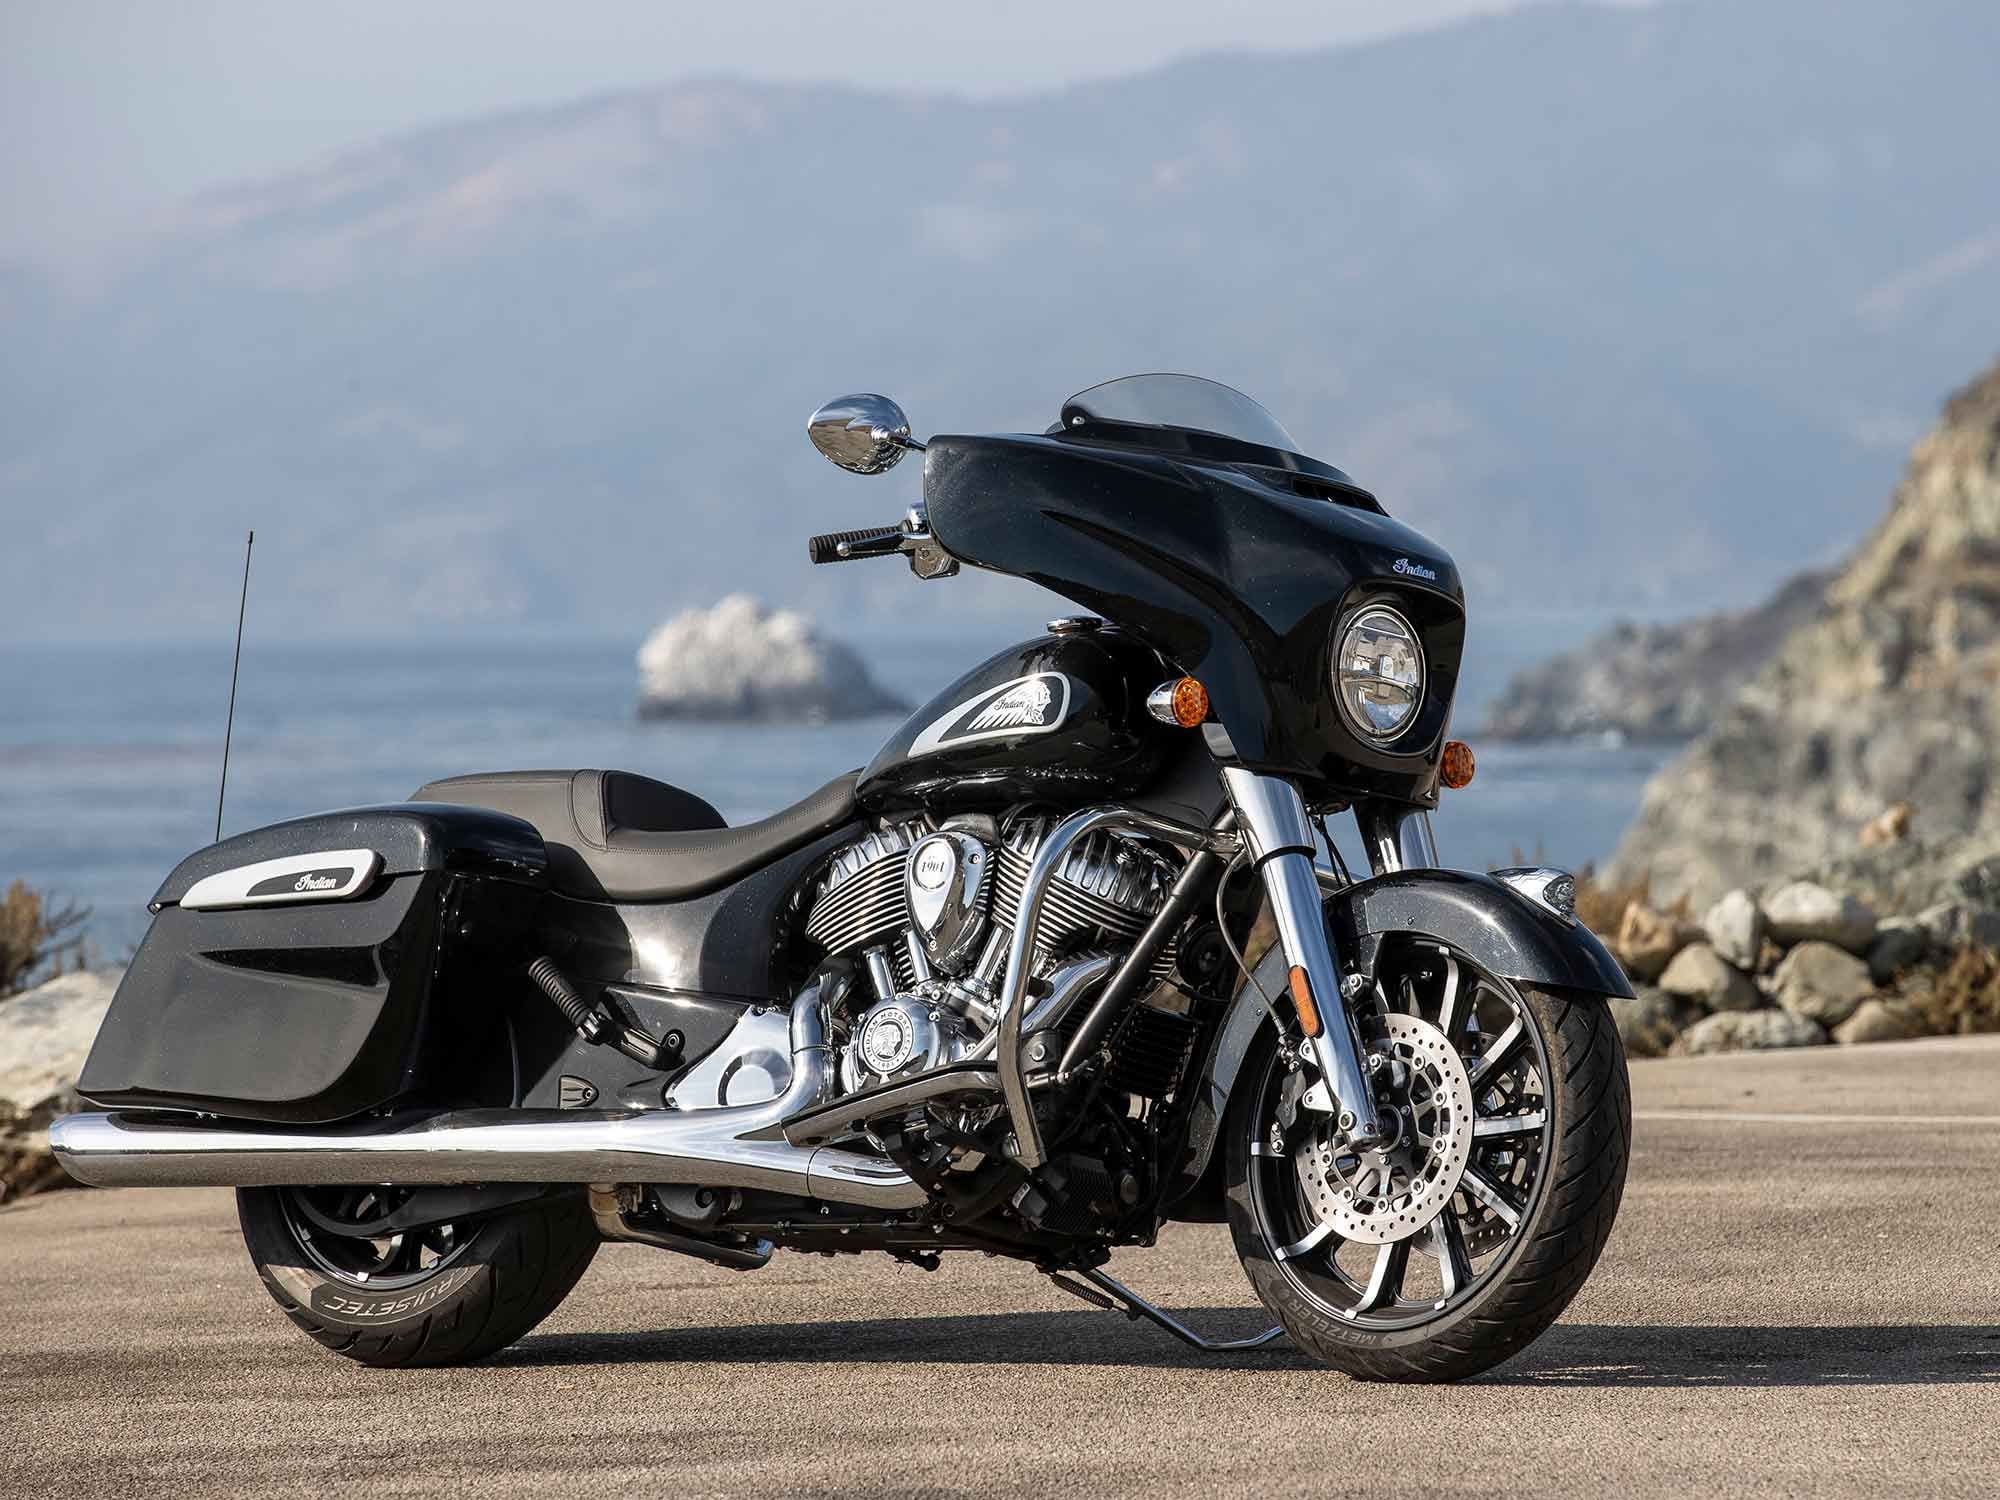 The 2021 Indian Chieftain Limited is a wonderful bike to ride, but shortcomings in the fit and finish category take away from the overall feeling of quality.